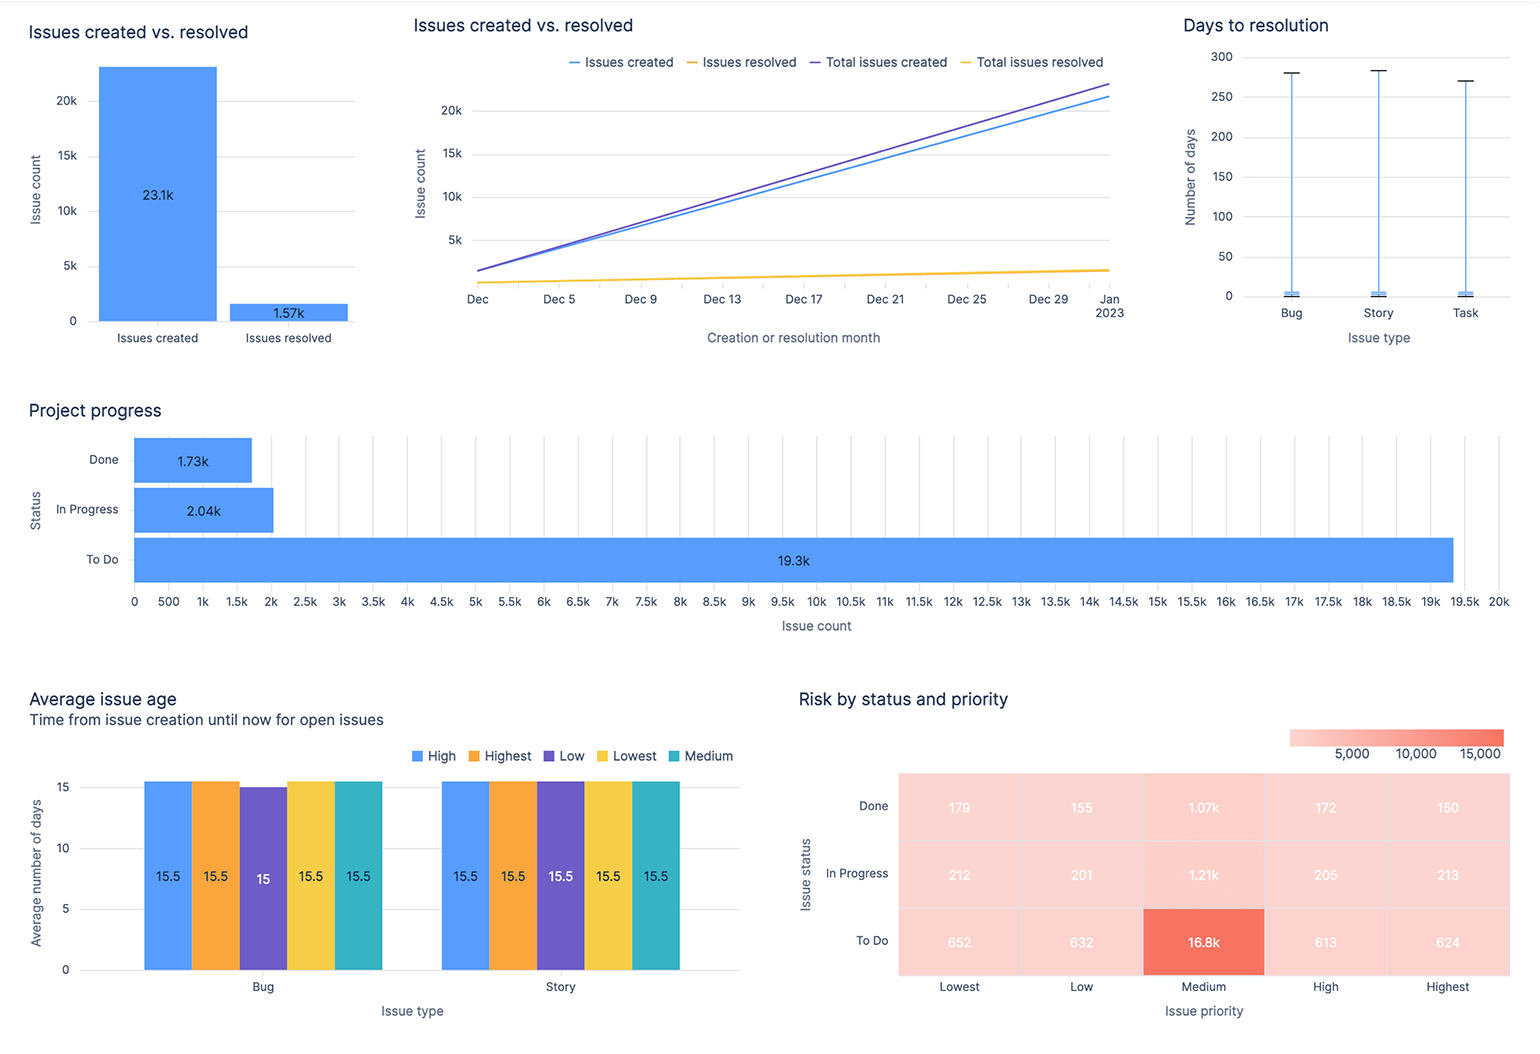 A Jira project overview dashboard in Atlassian Analytics shows charts used by DevOps teams to track issues created vs. resolved, project progress, average issue age, and risk by status and priority.